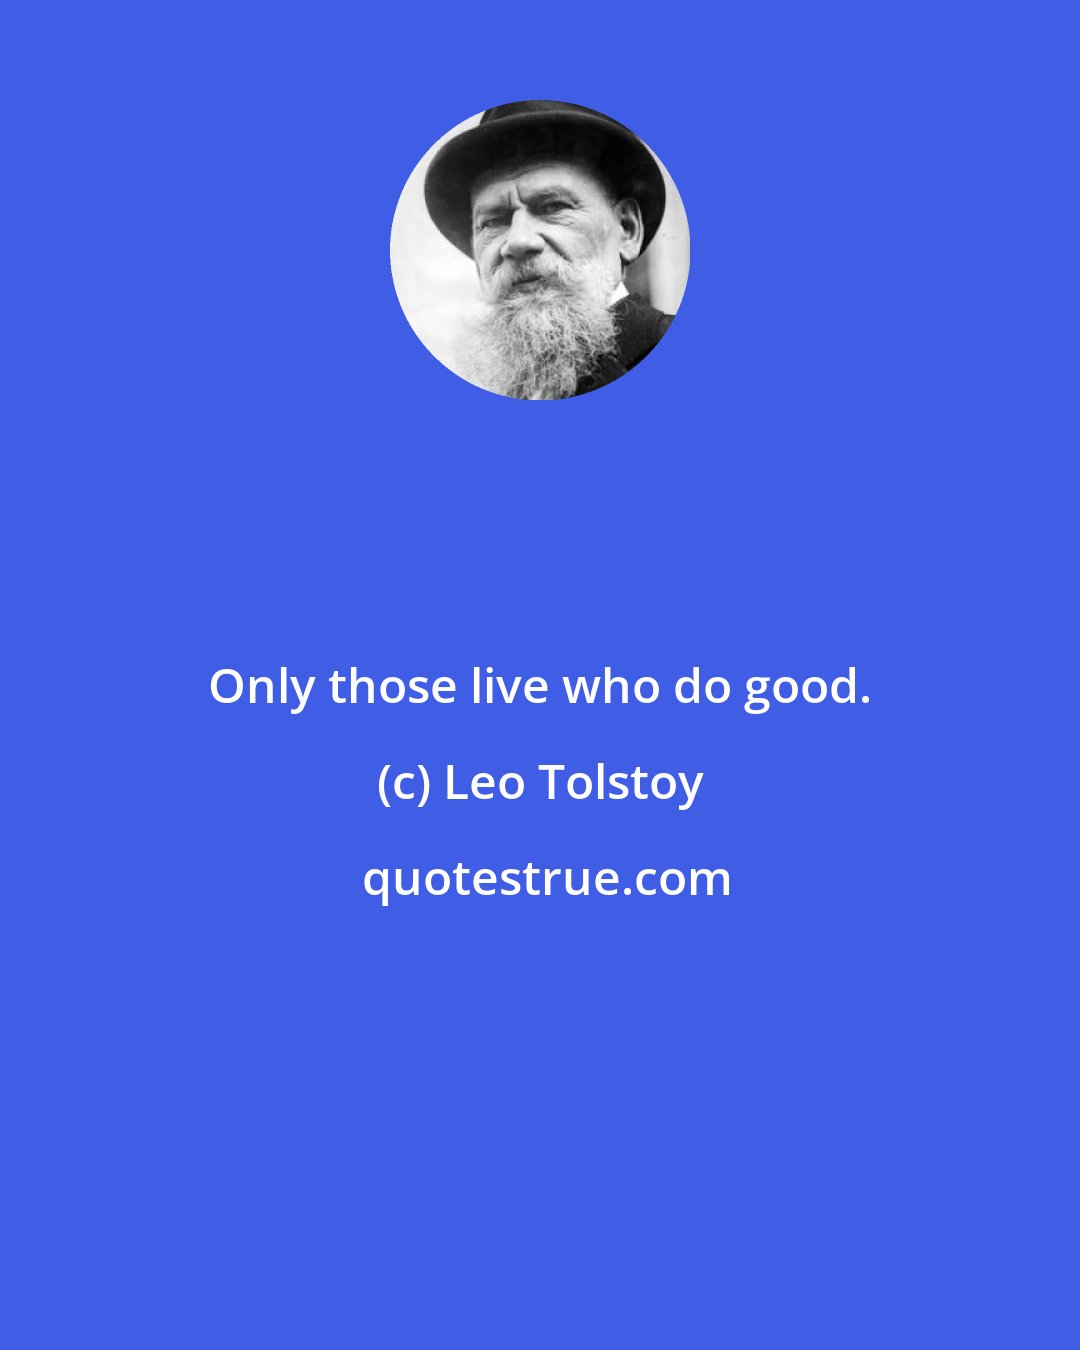 Leo Tolstoy: Only those live who do good.